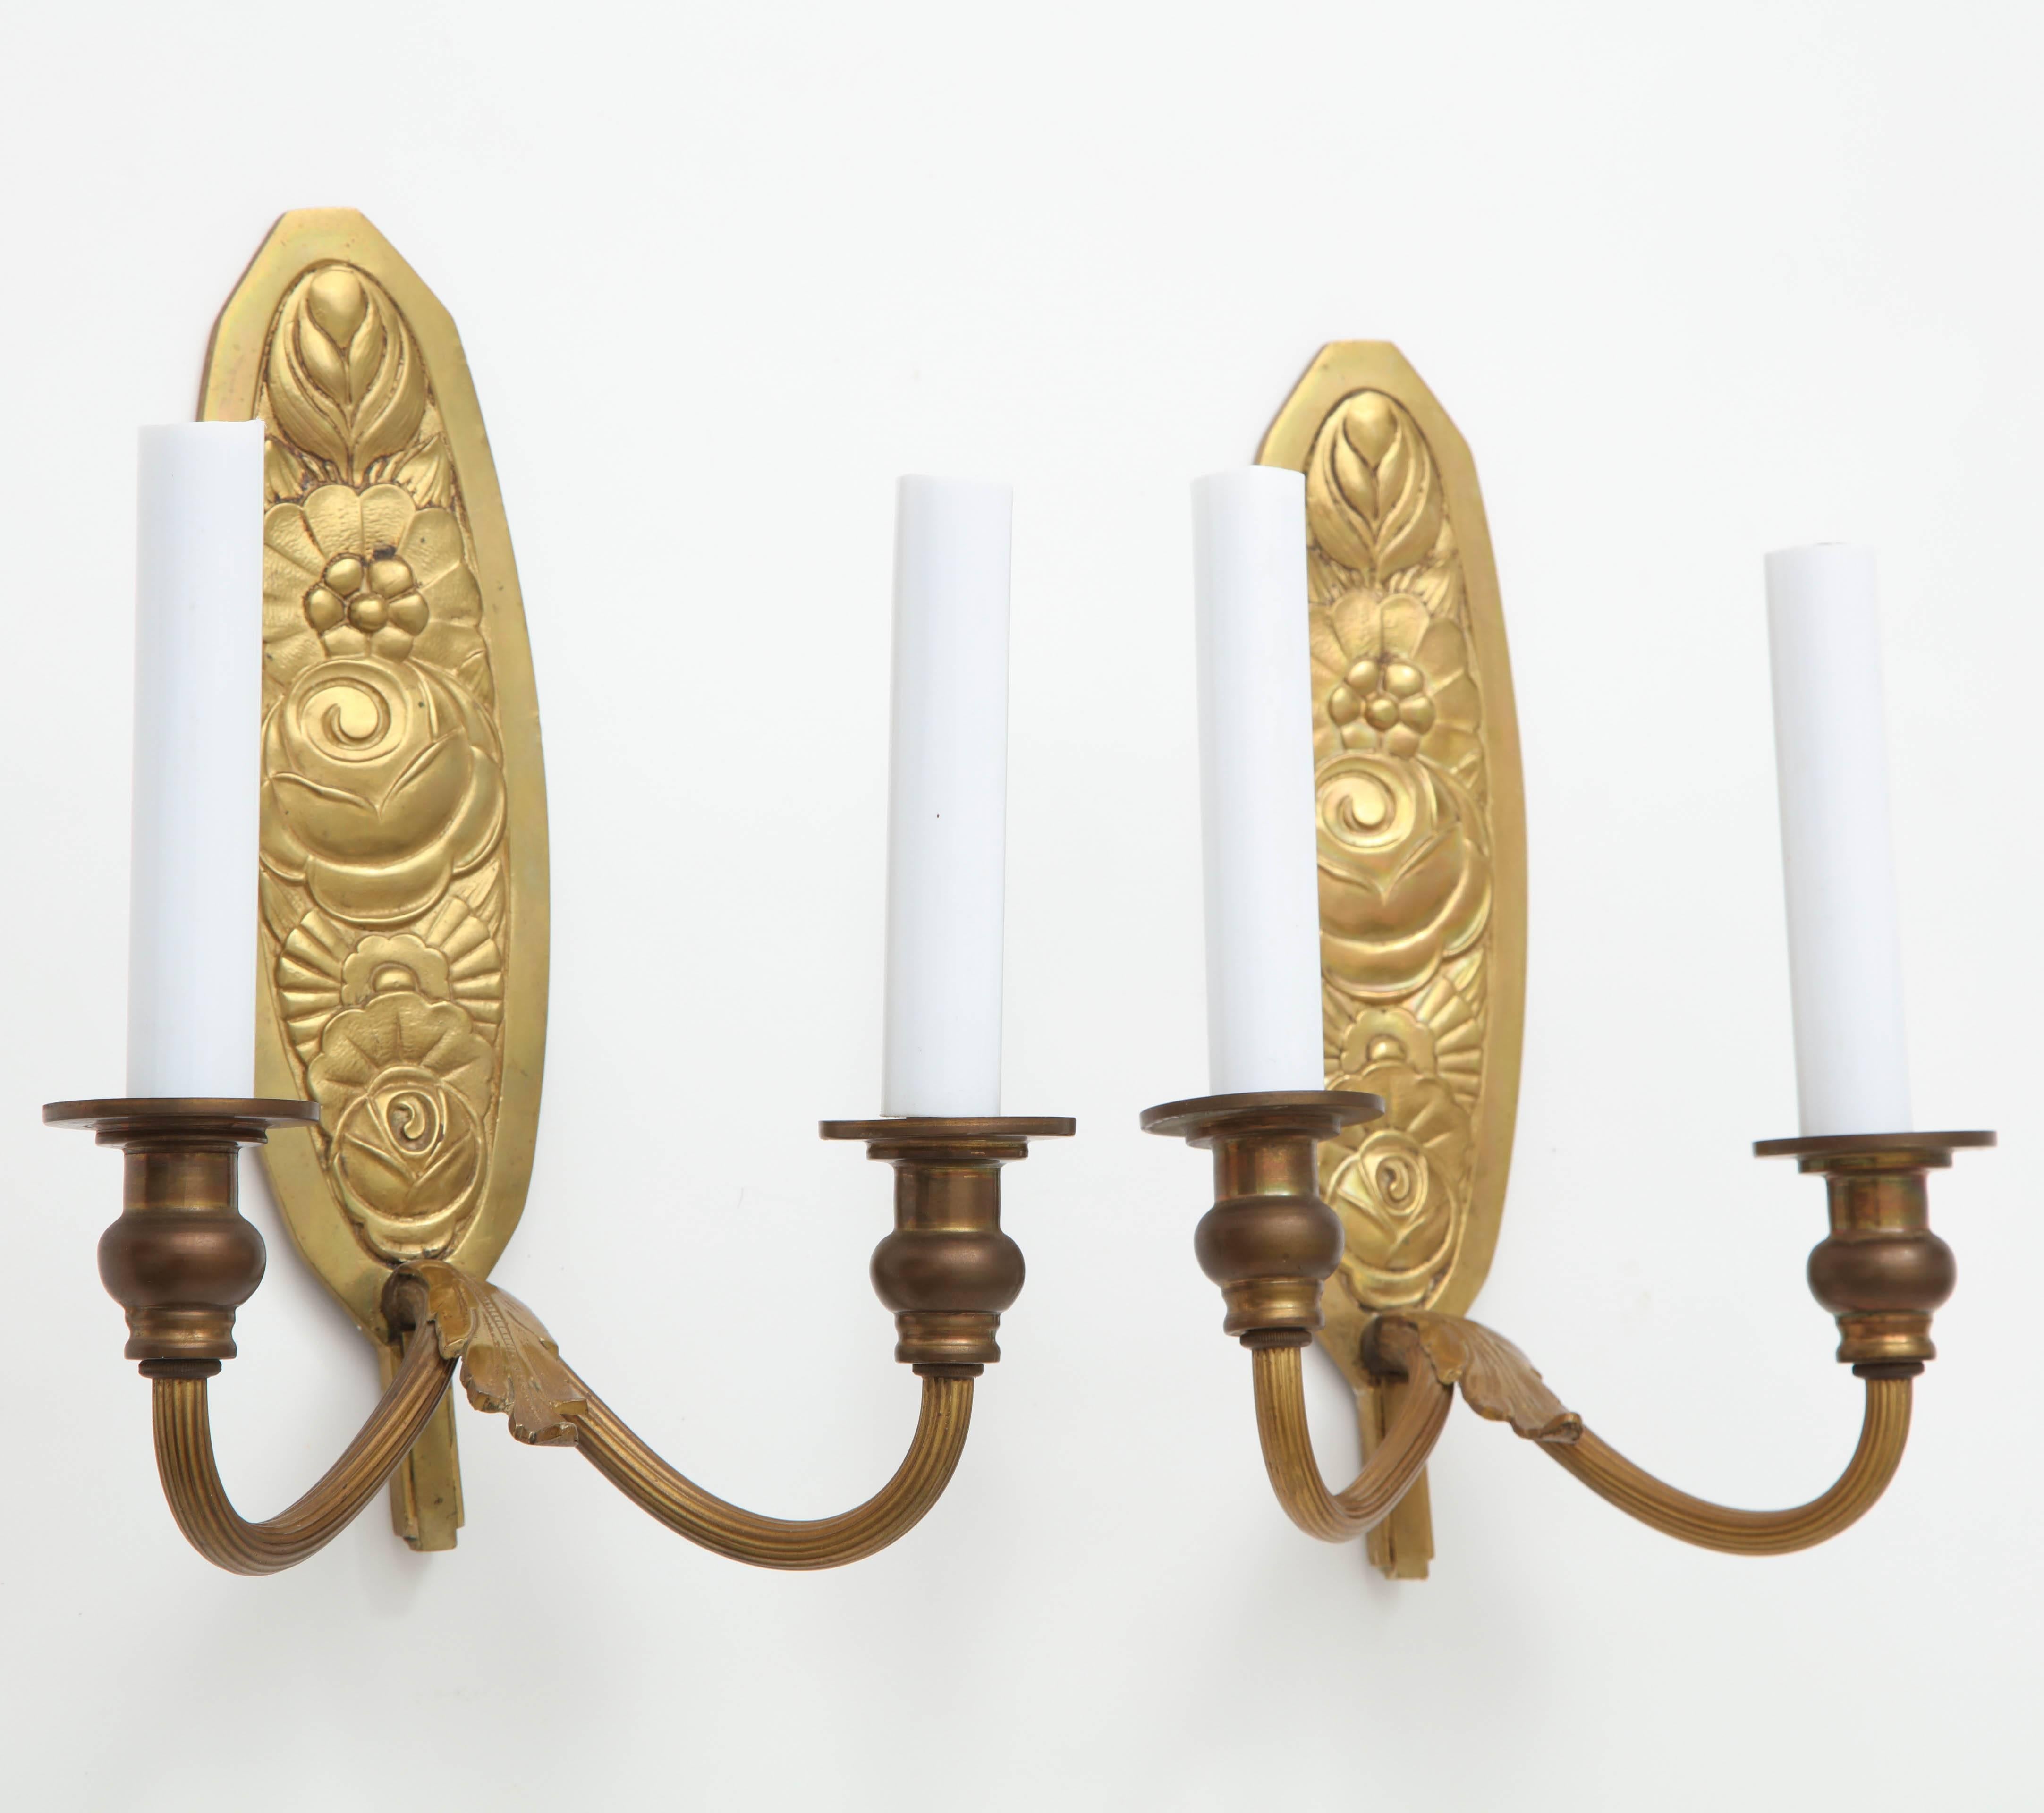 Pair of very fine bronze wall mount candle sconces or candleholders, each with two arms, and featuring a richly embossed backplate having a floral design. France, circa 1930-1940, possibly older.

Sconces are not electrified; shown in photo with